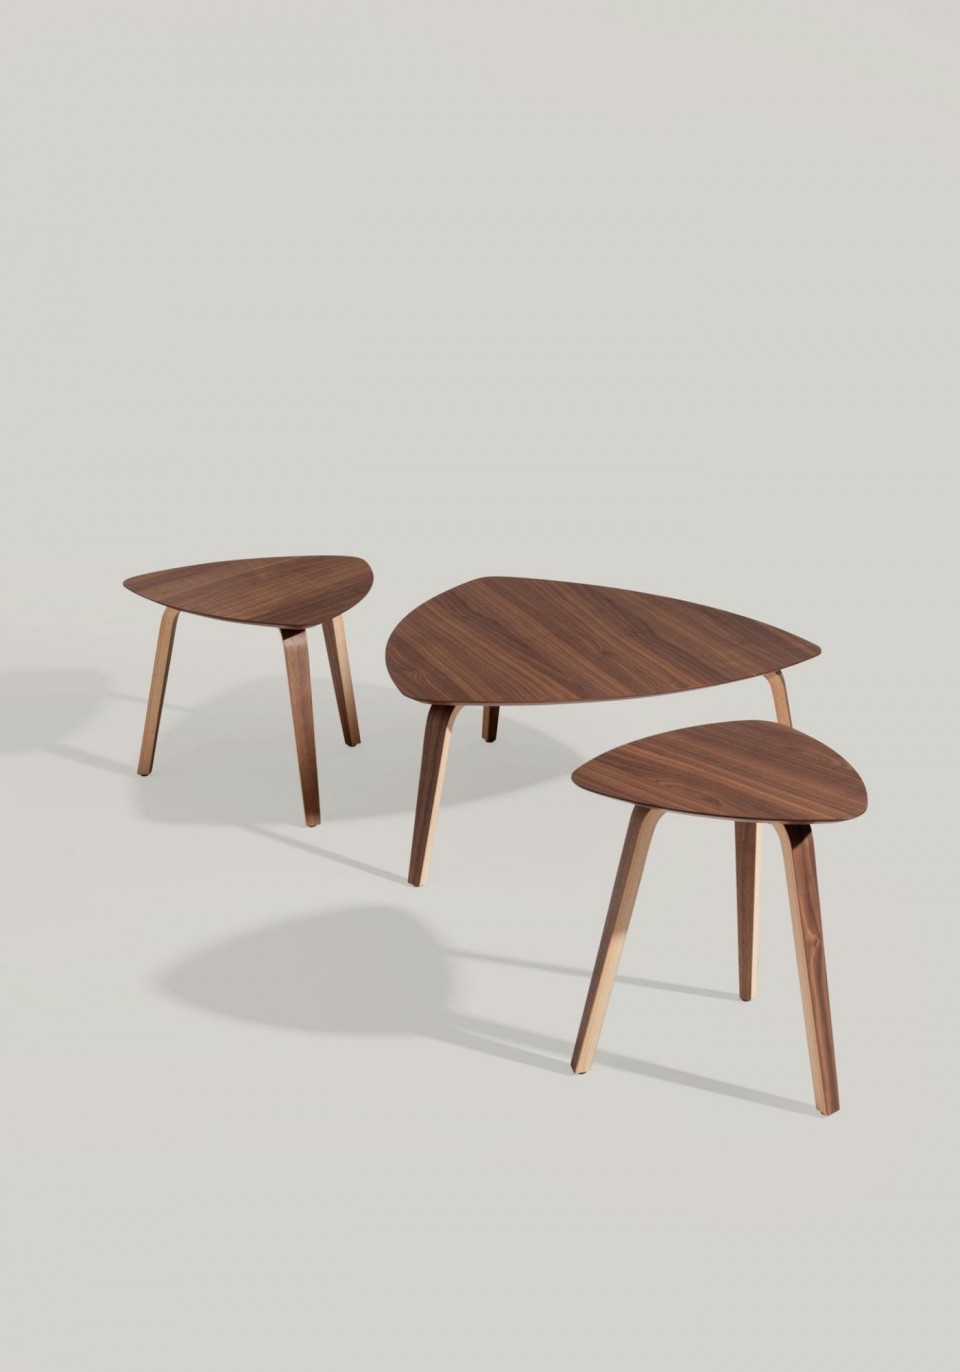 Dalia coffee table collection by MIDJ